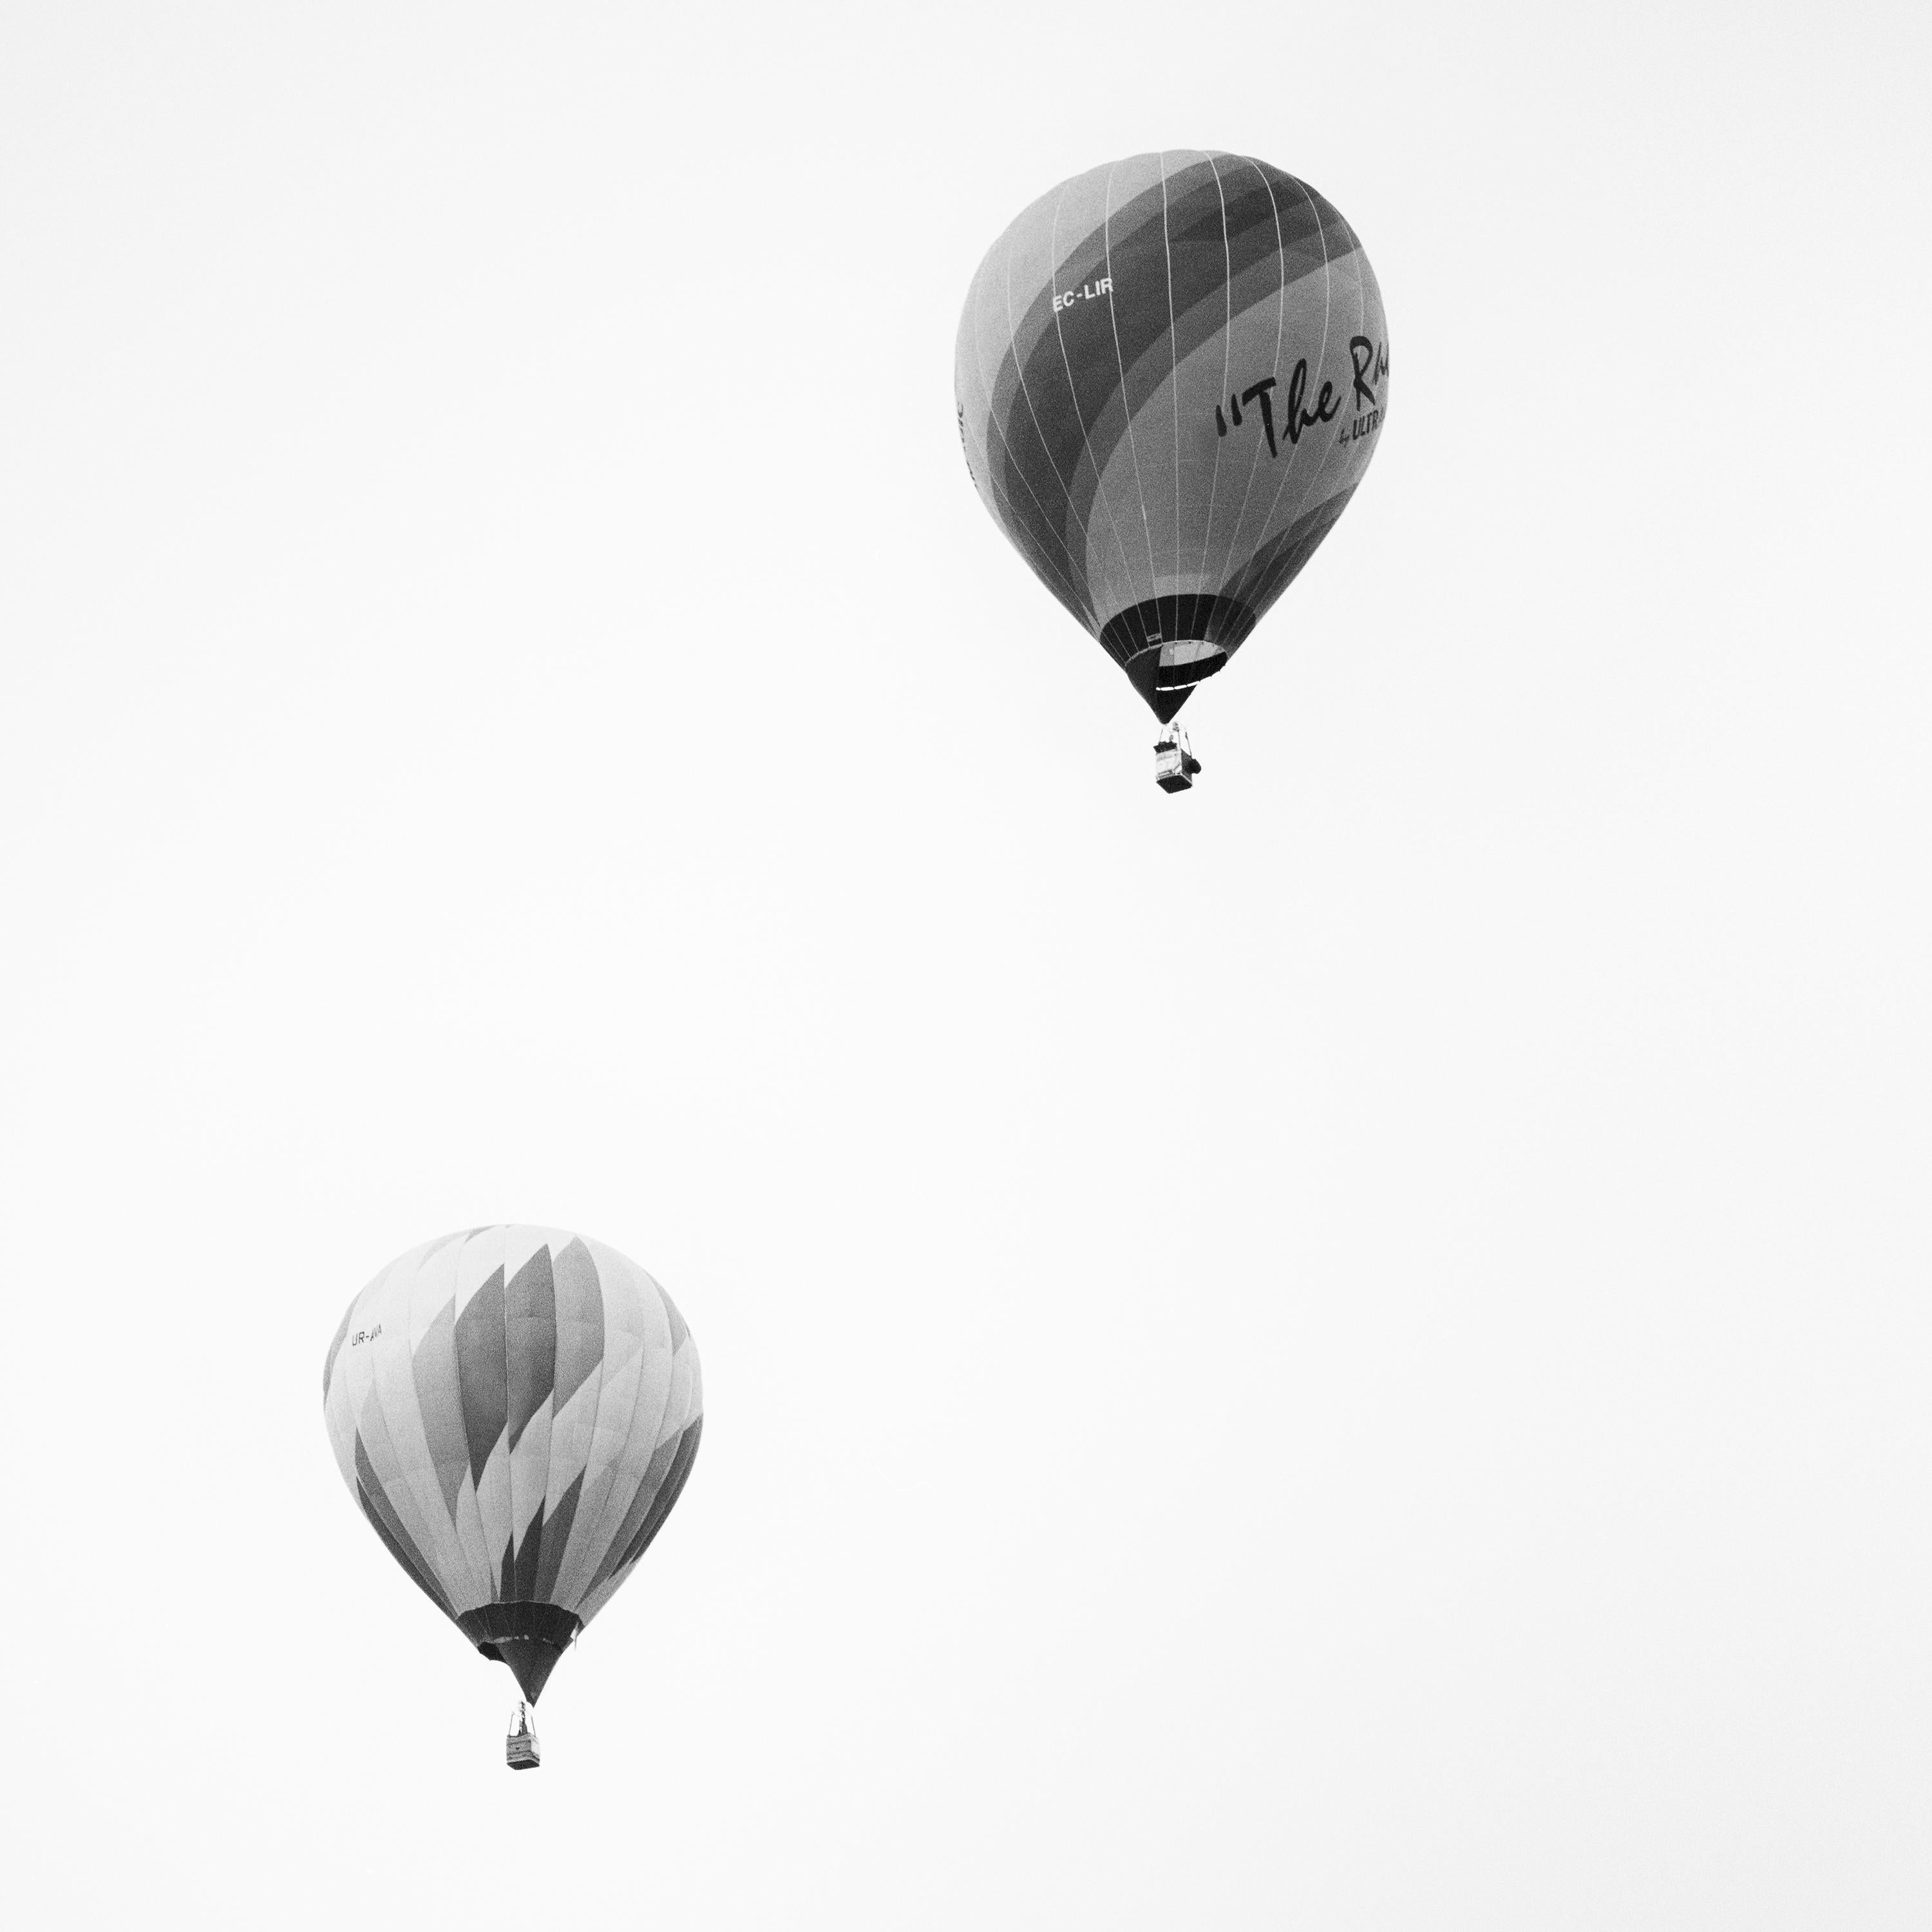 Hot Air Balloon, Championship, minimalist black and white photography, landscape For Sale 4